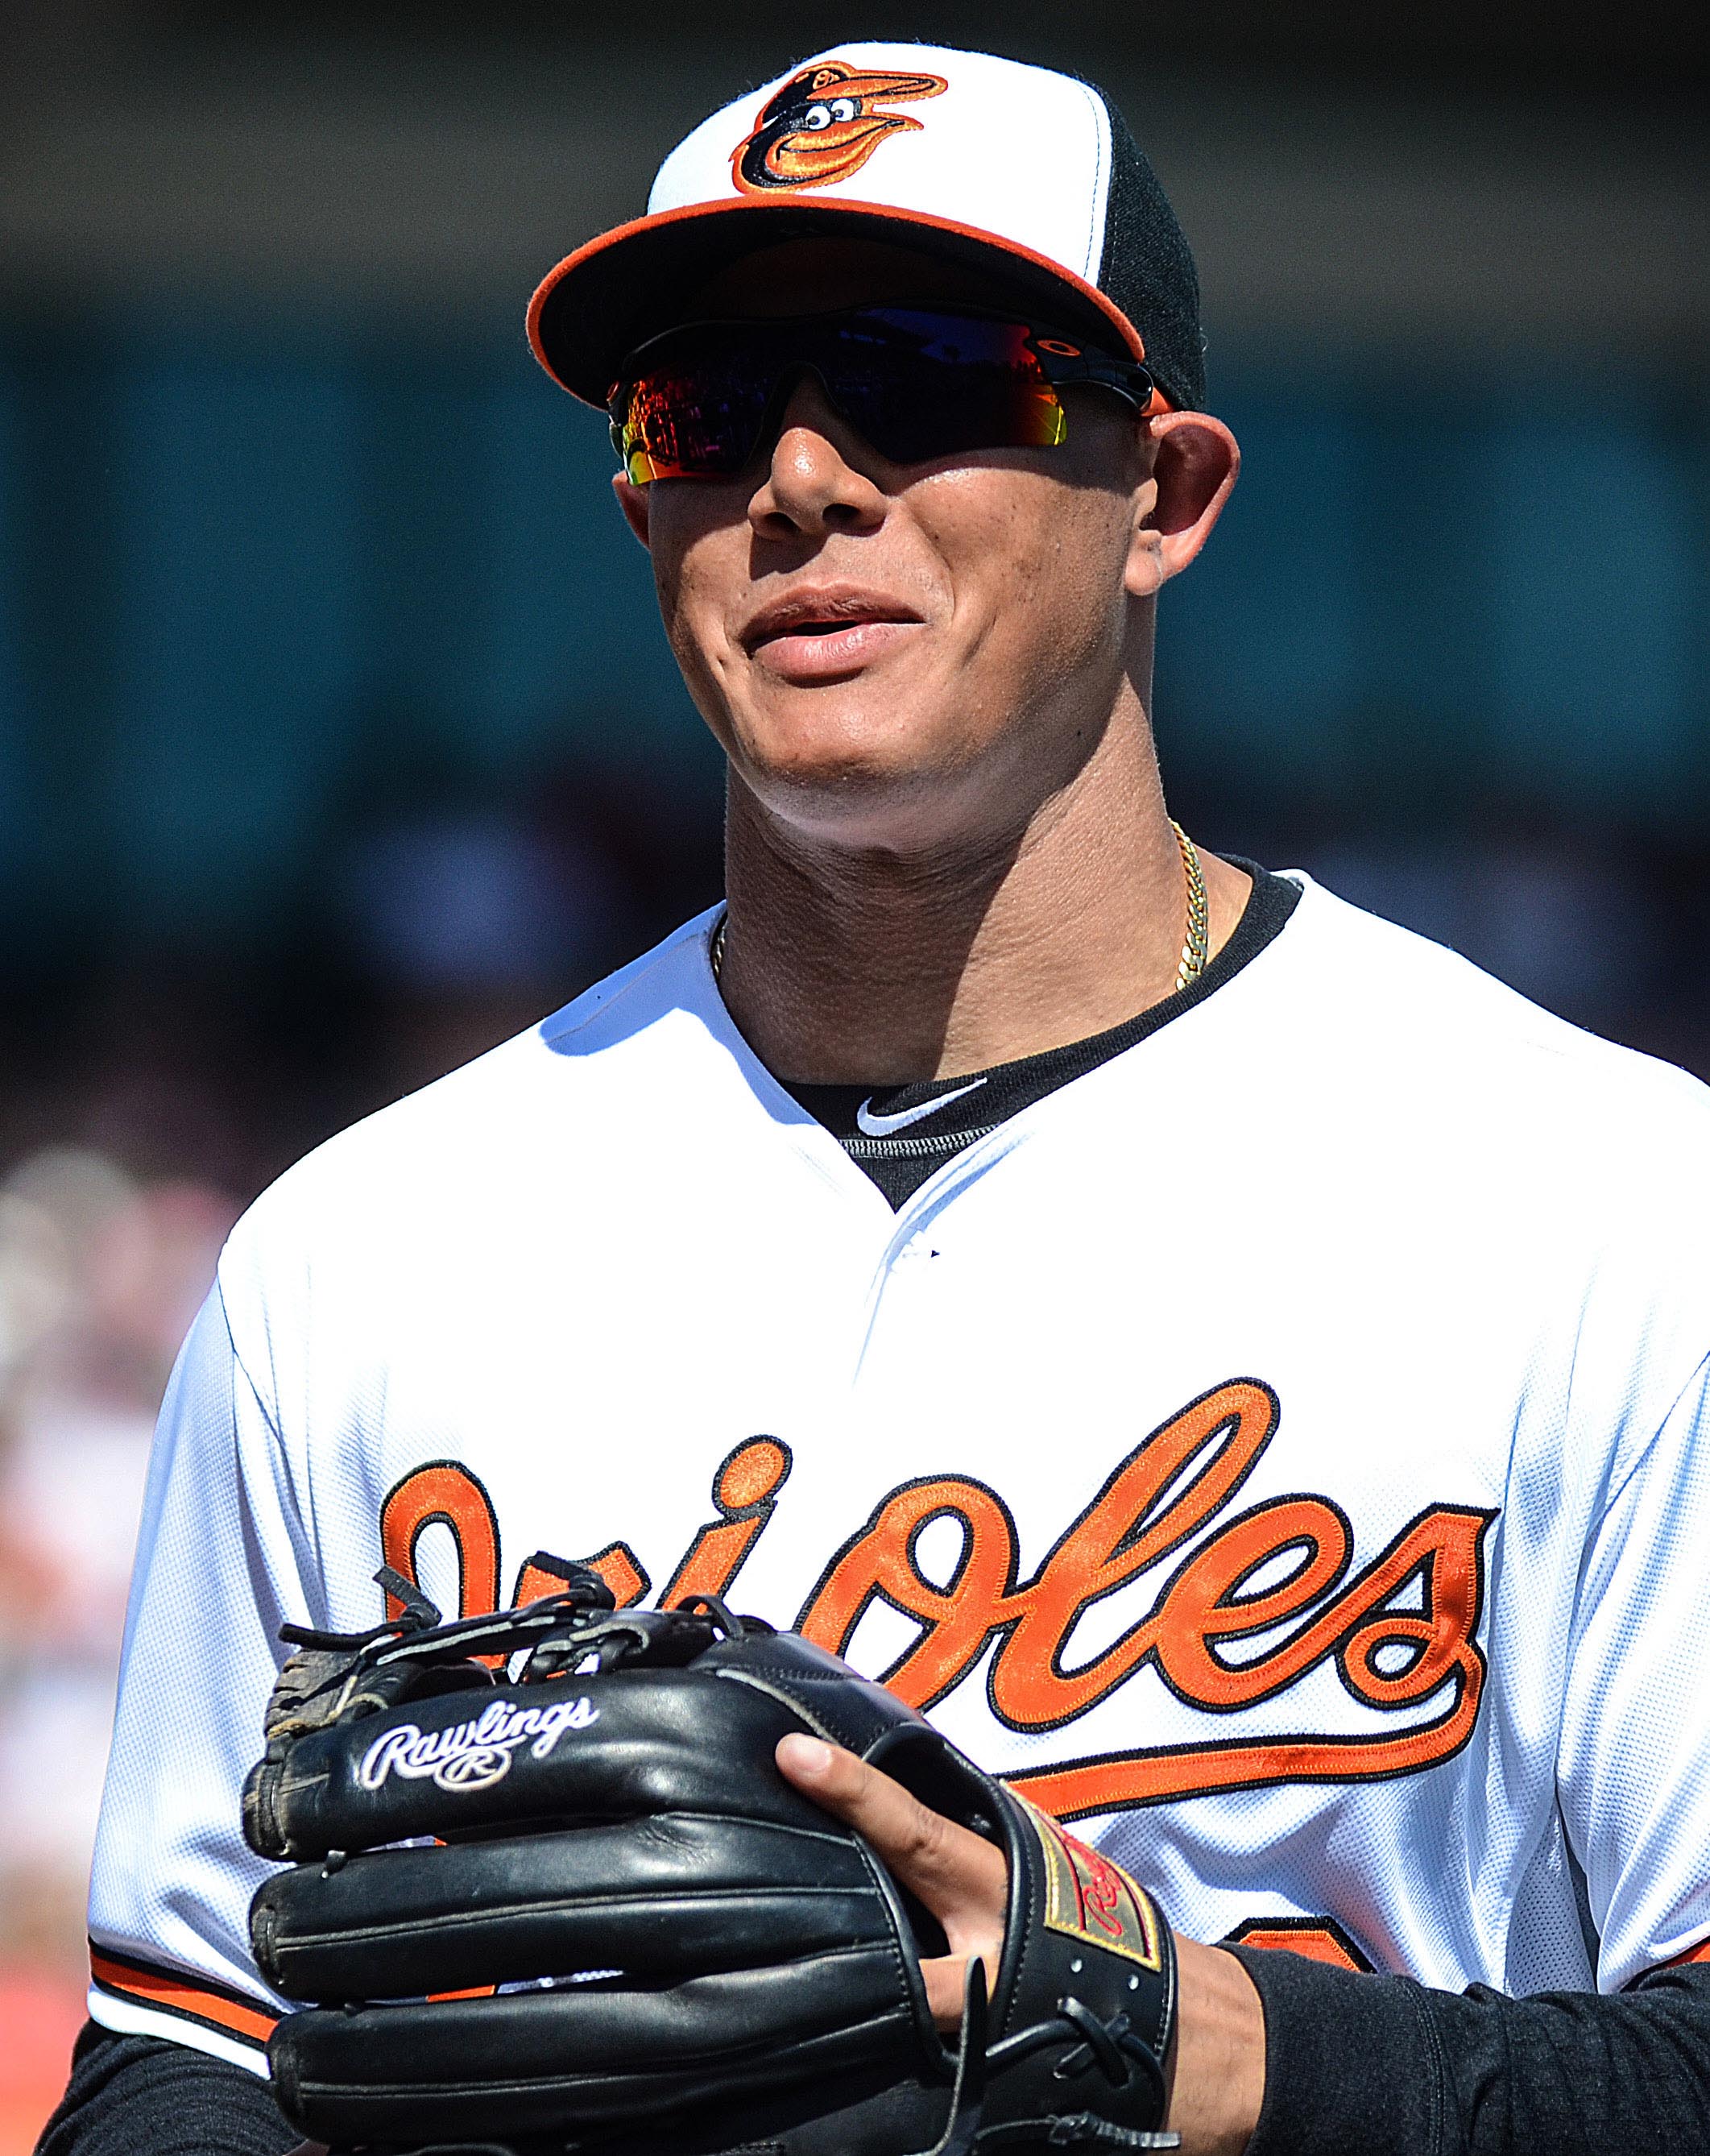 Manny Machado hopes both knees hold up in 2015. (USA TODAY Sports)